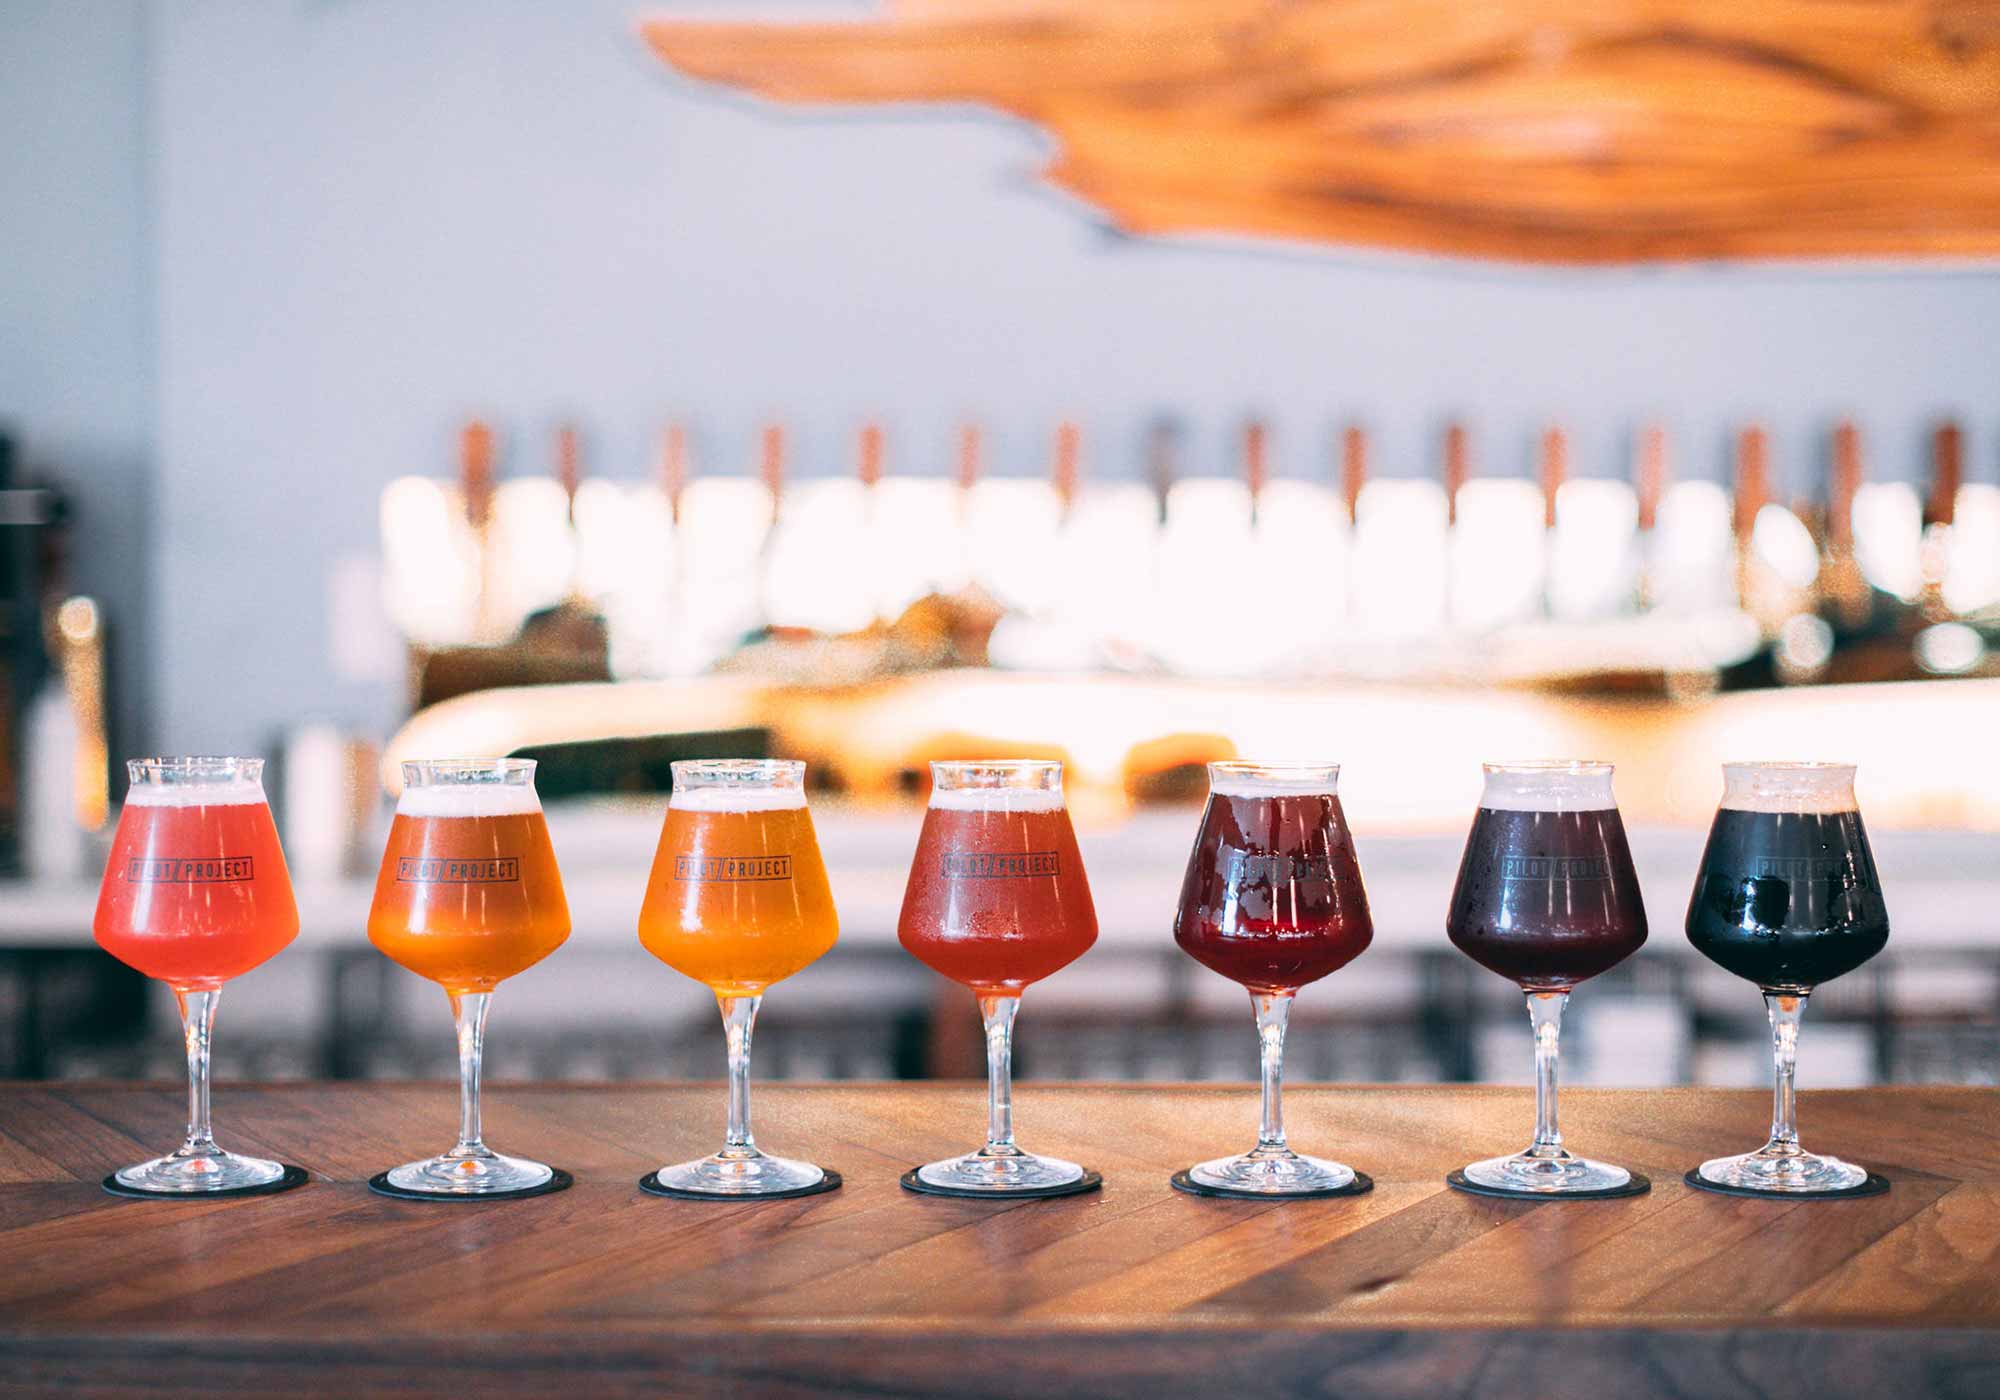 The New Brewery Incubator Helping Minority-Owned Businesses “Pilot” Their Brands